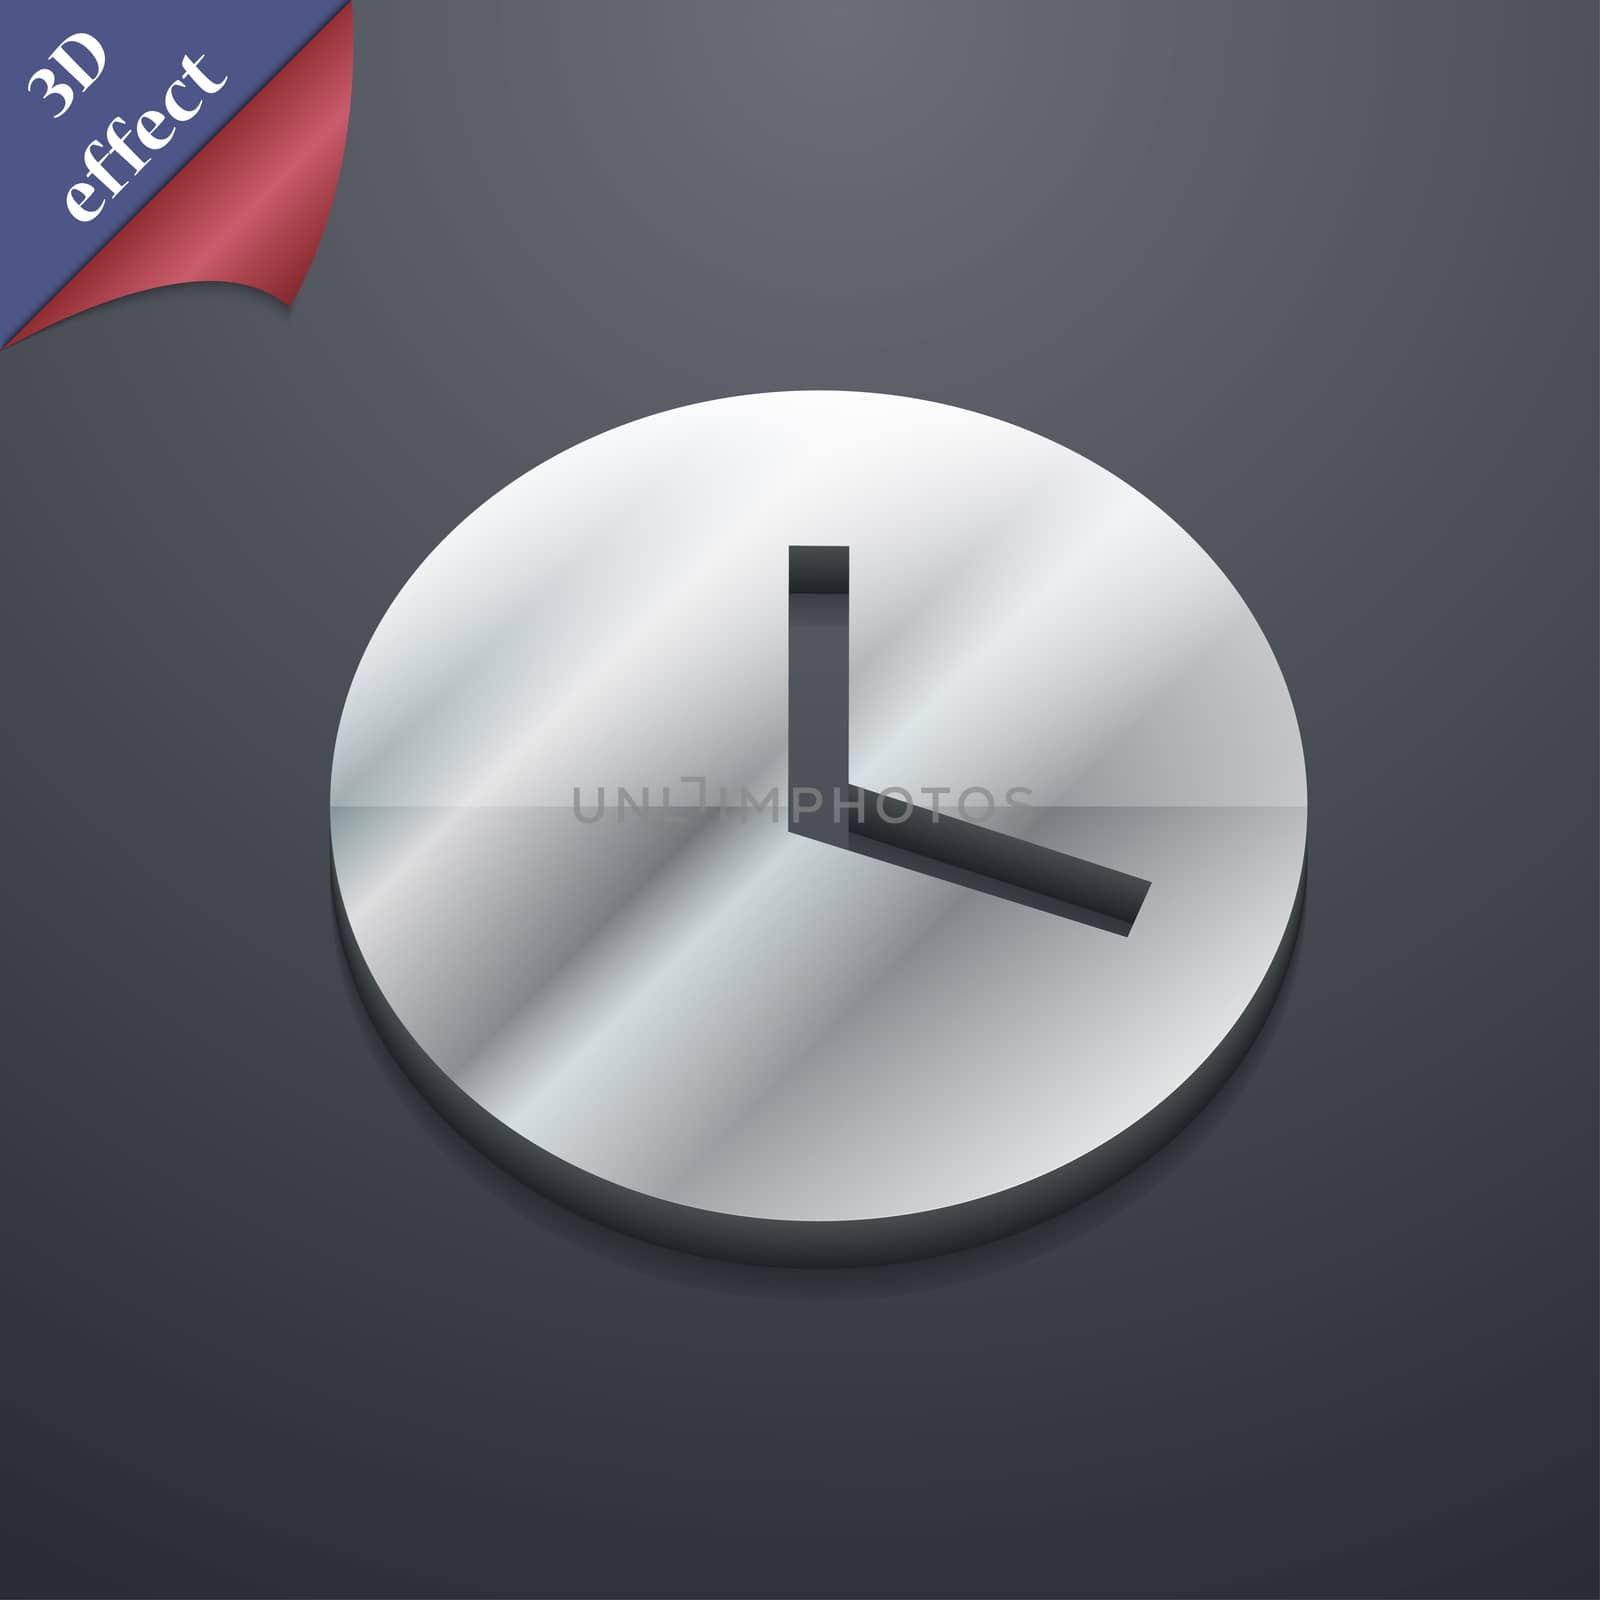 Mechanical Clock  icon symbol. 3D style. Trendy, modern design with space for your text illustration. Rastrized copy